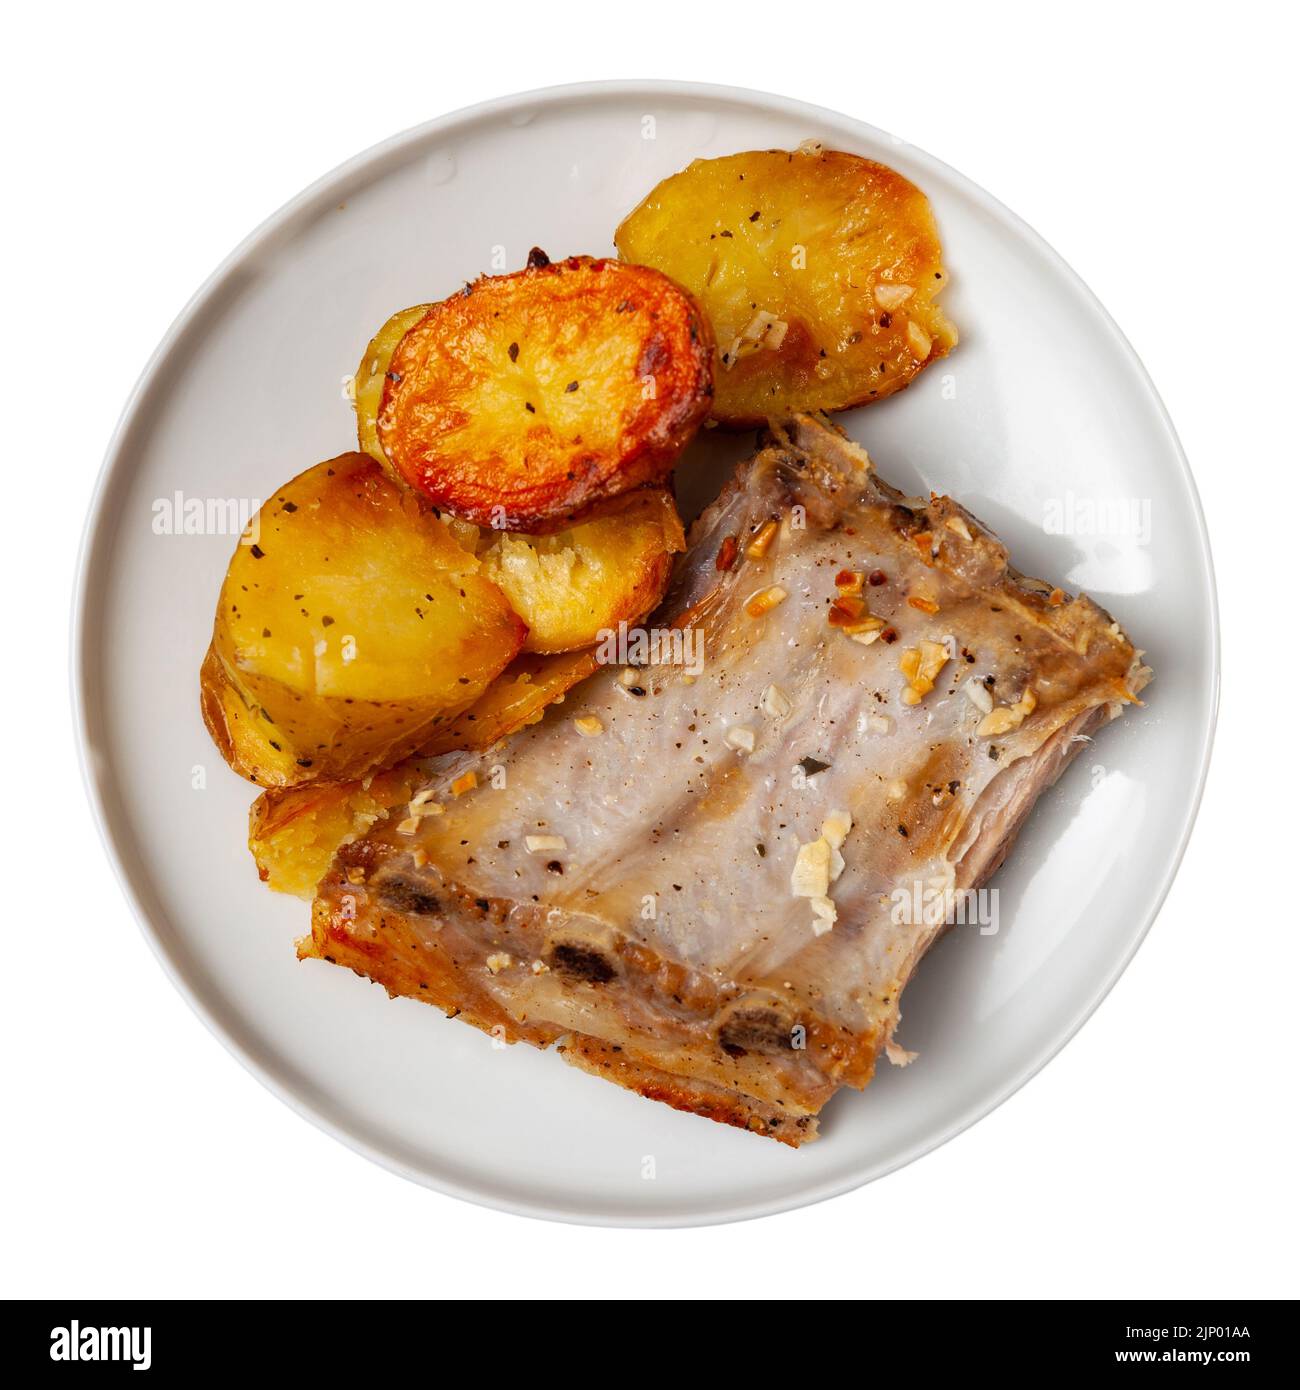 Pork ribs with boiled potatoes and spices on ceramic plate Stock Photo